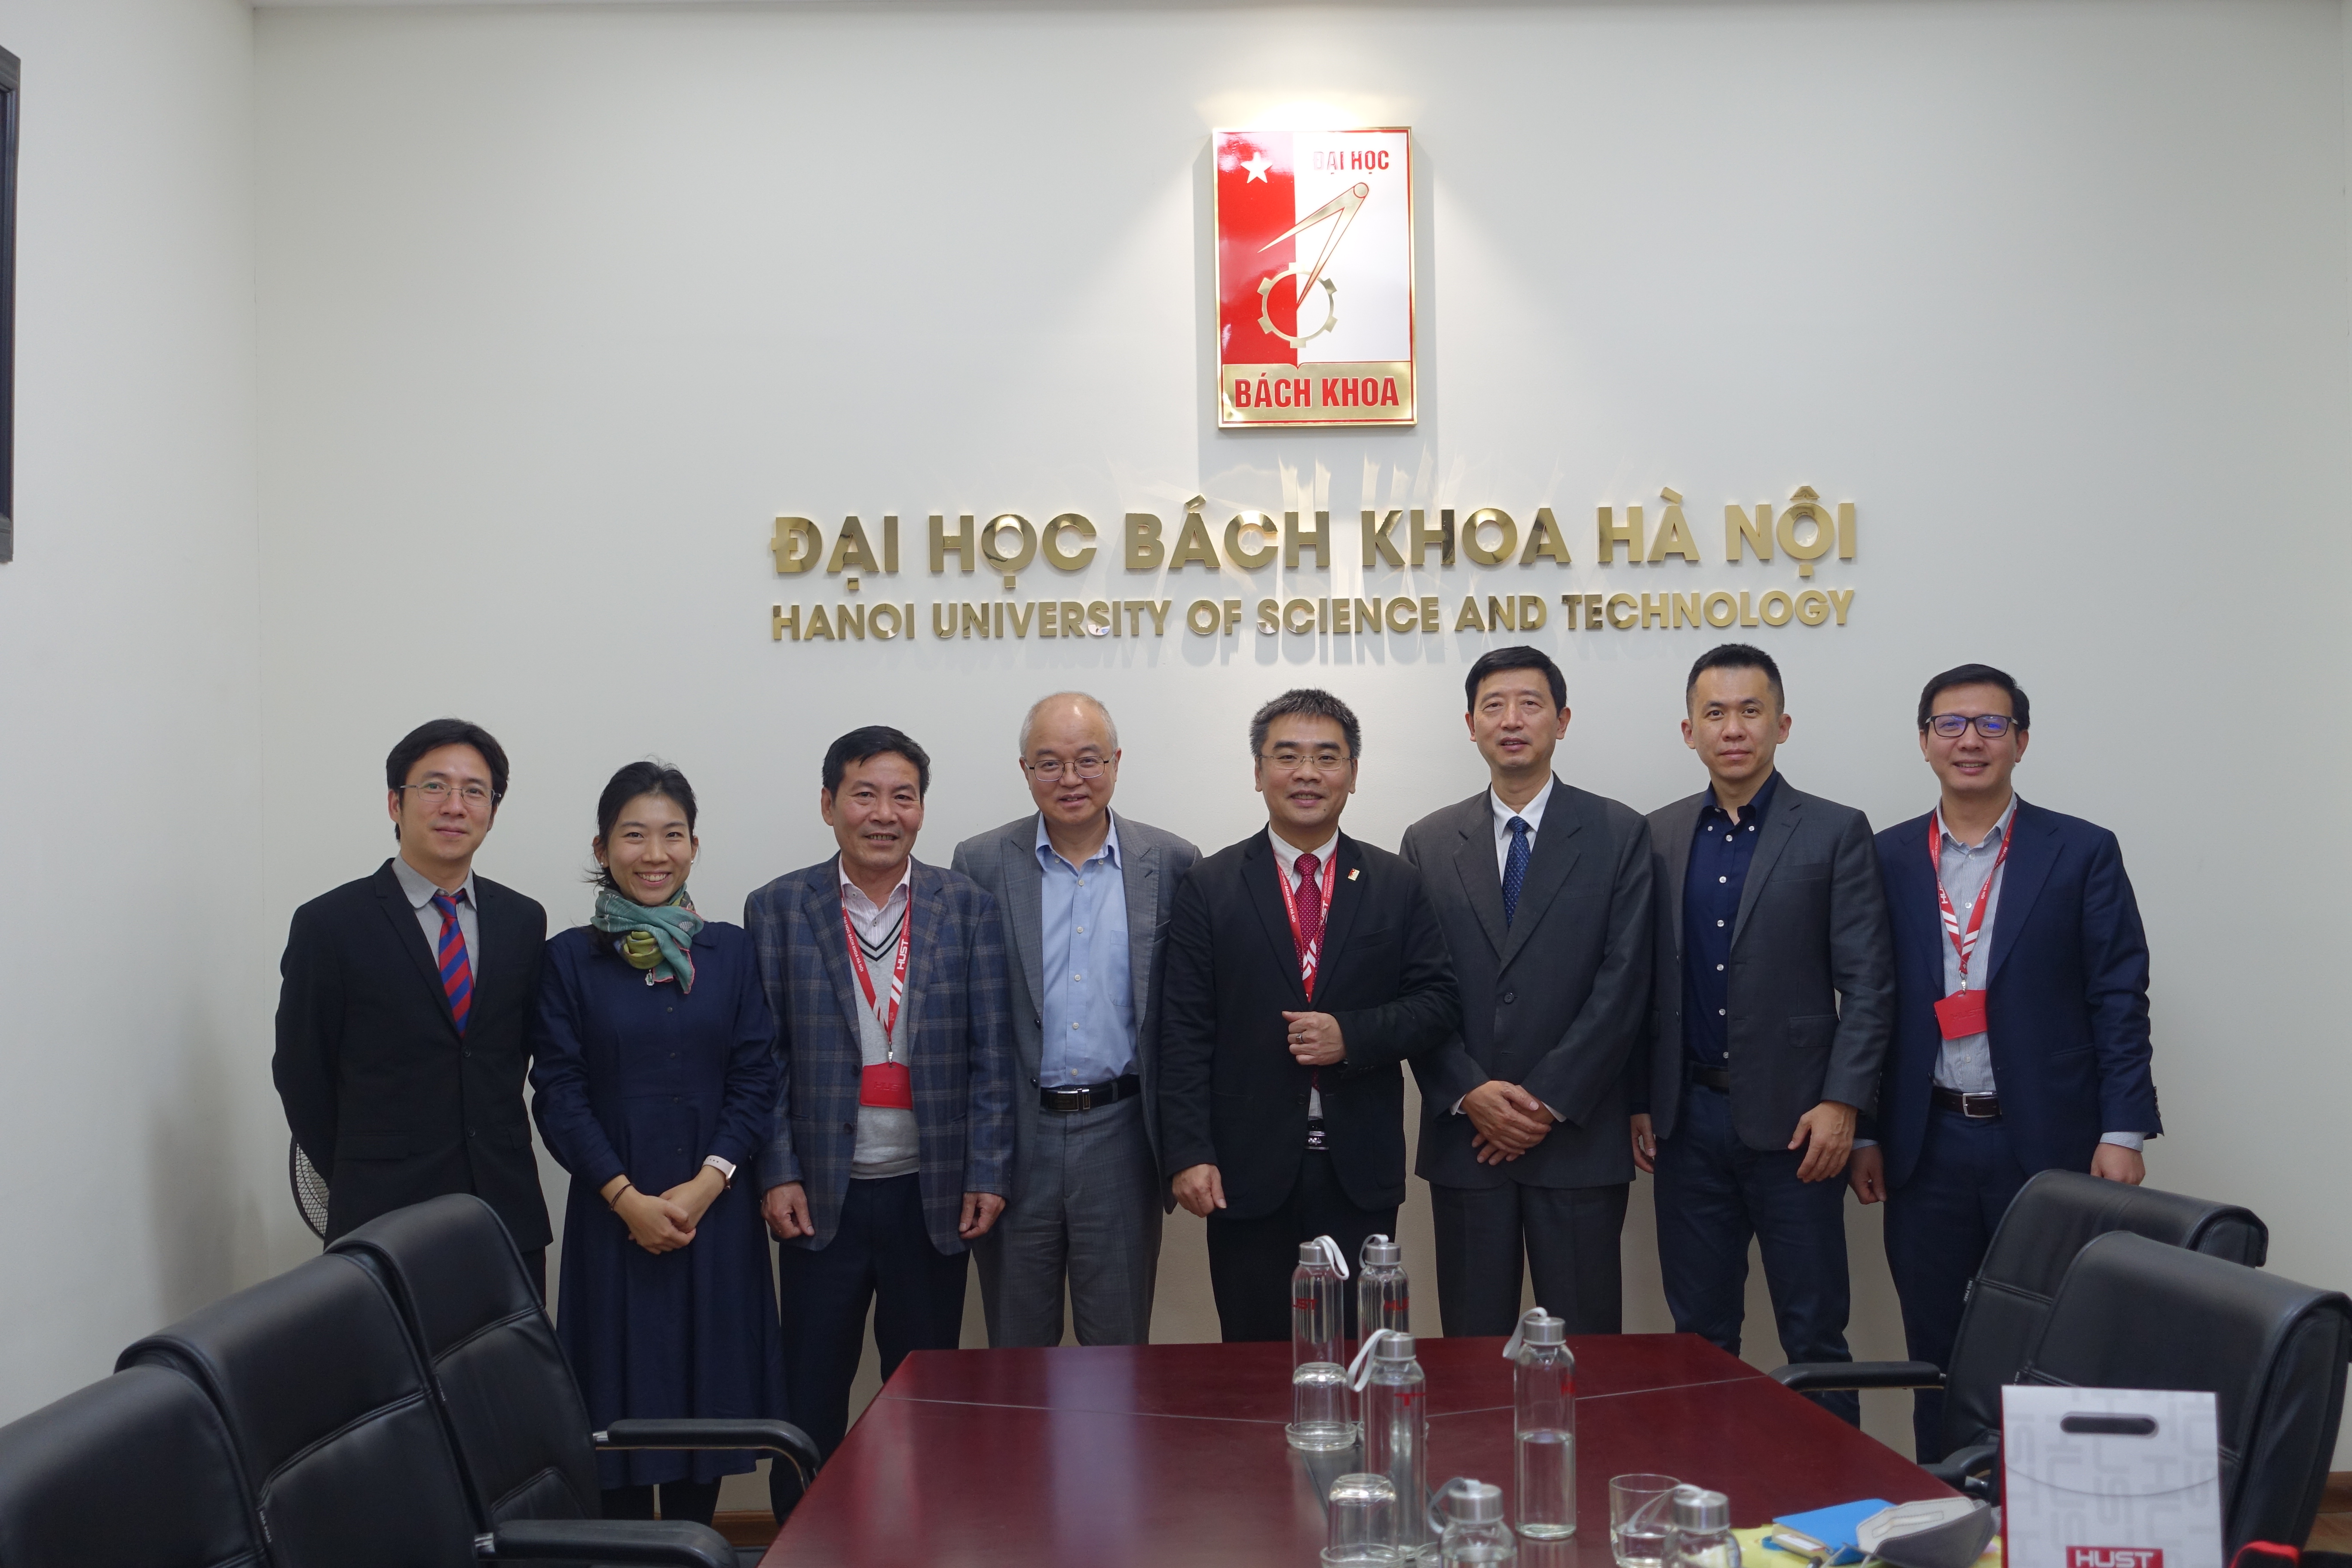 HKUST Vice President for Institutional Advancement Prof. WANG Yang visits Hanoi University of Science and Technology. 